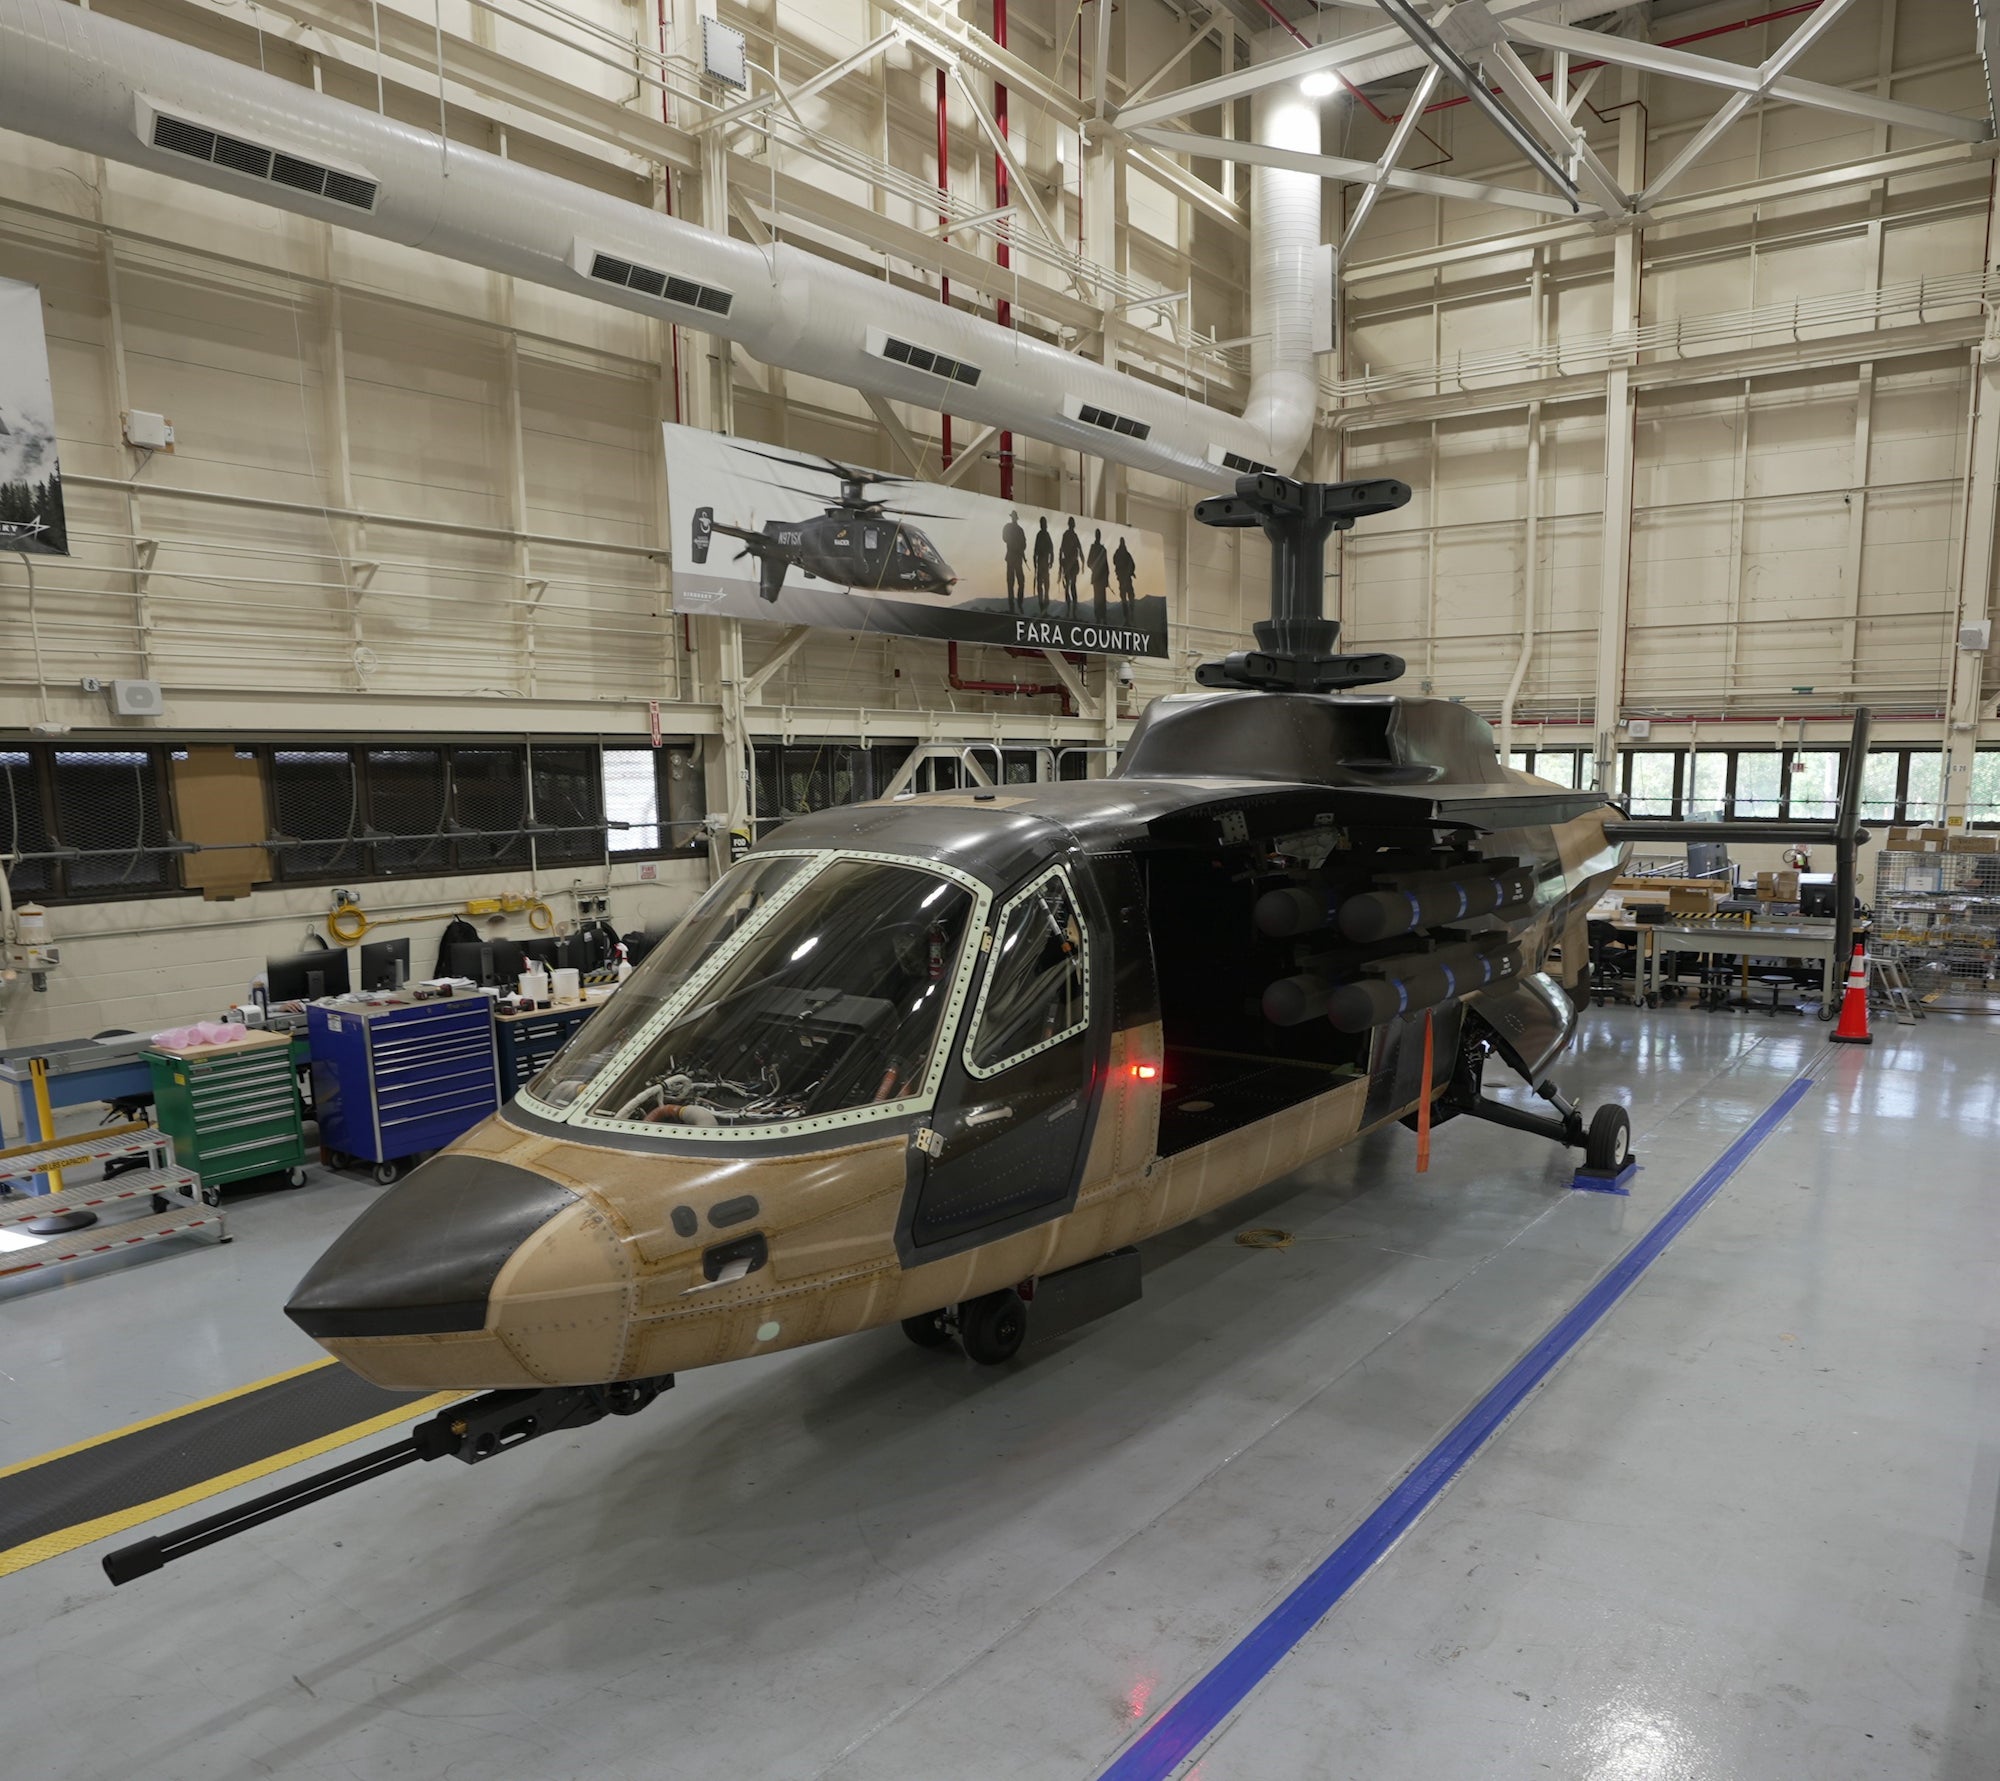 Take a peek at Sikorsky’s scout helicopter prototype